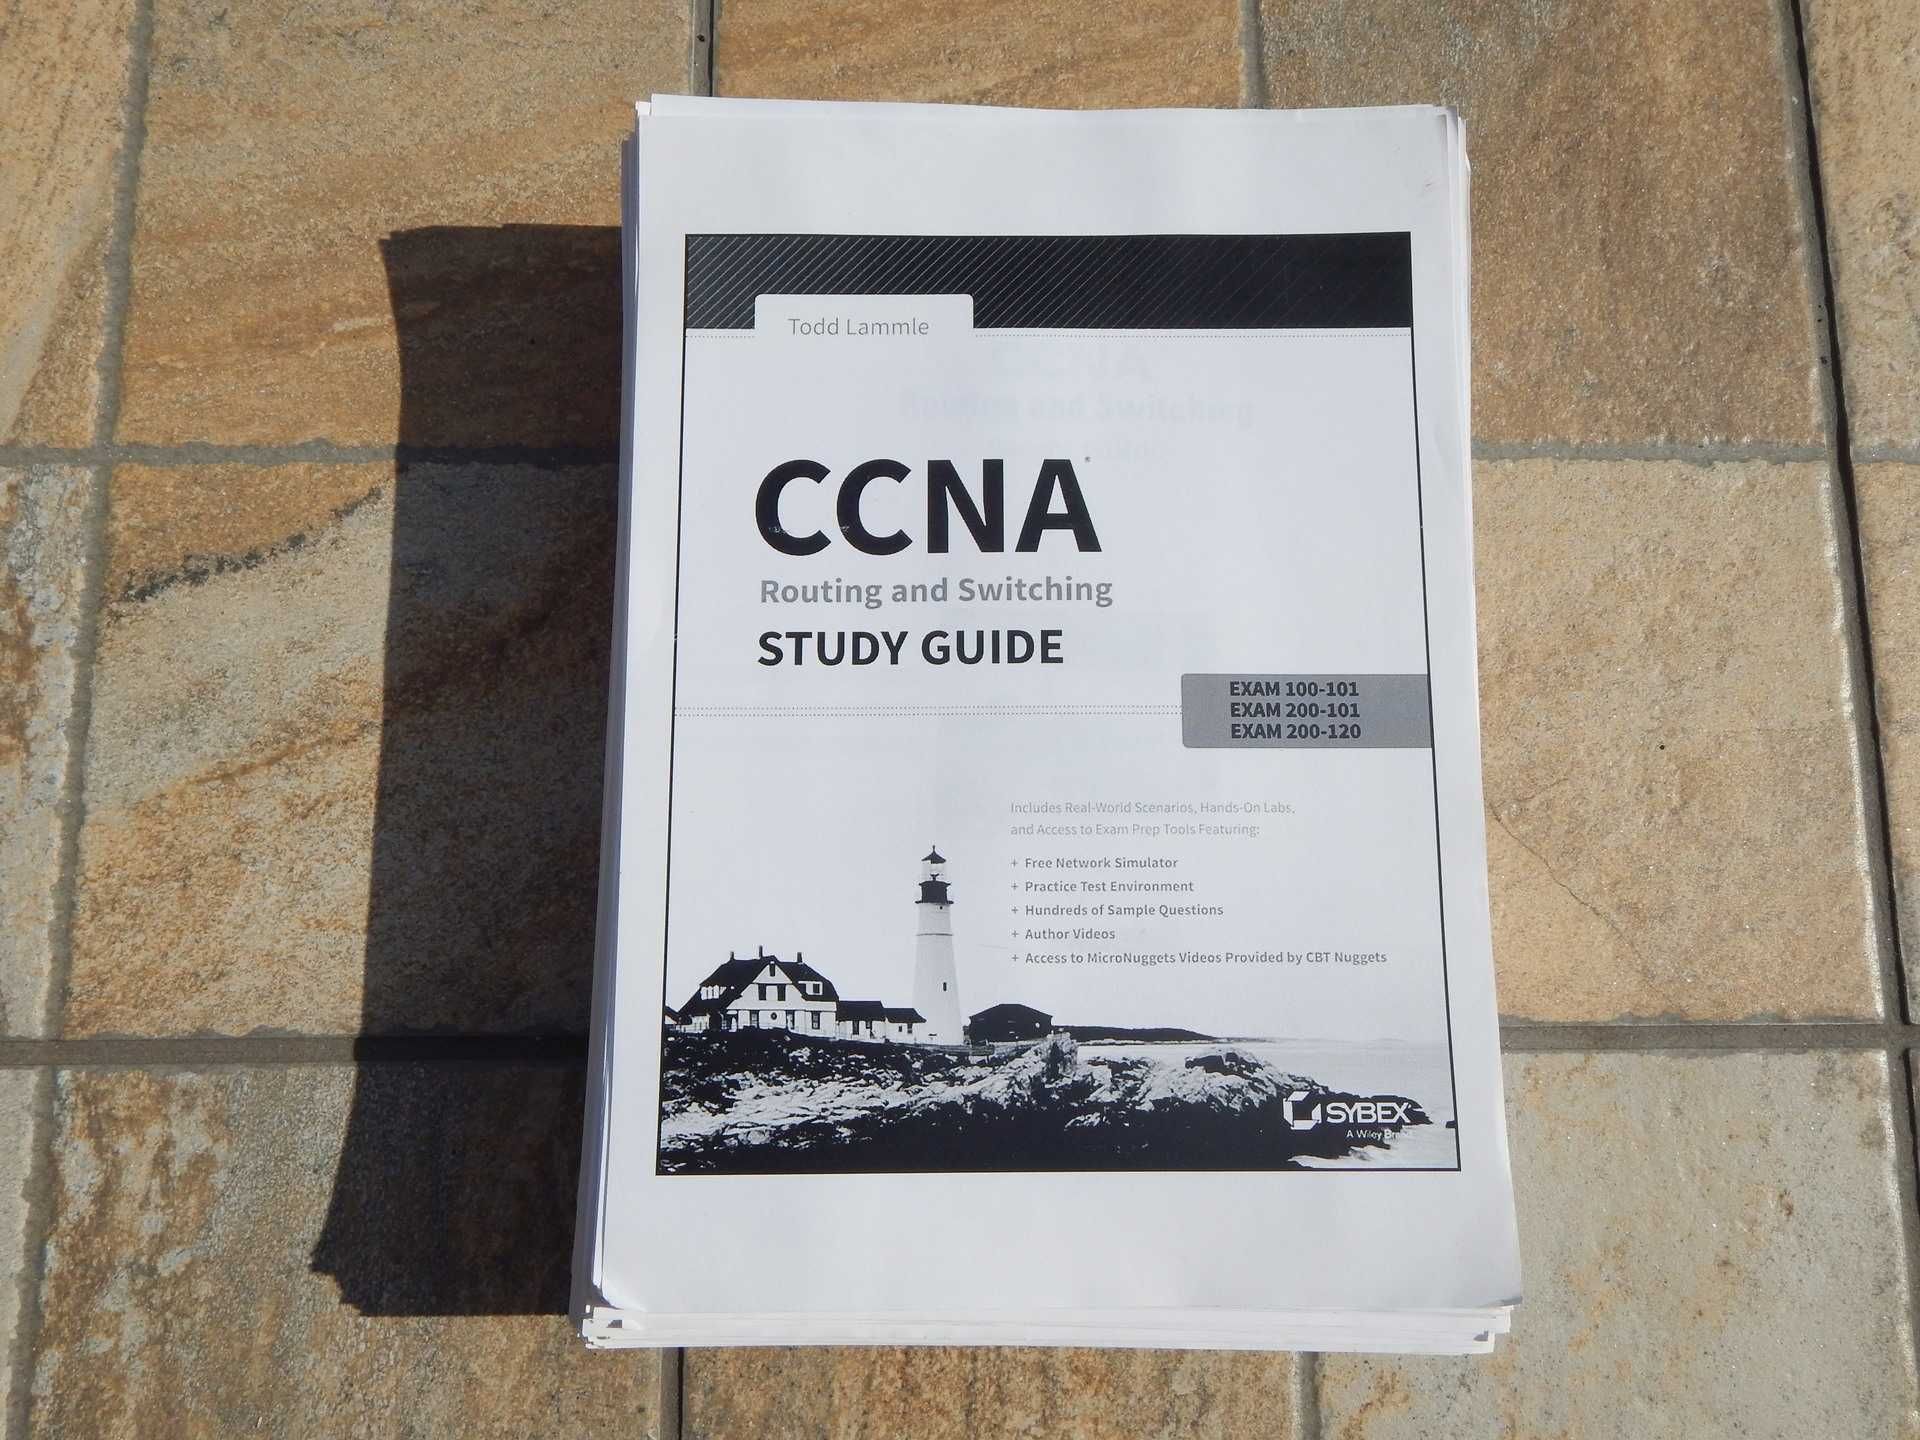 CCNA Routing and Switching Study Guide Todd Lammle 2013